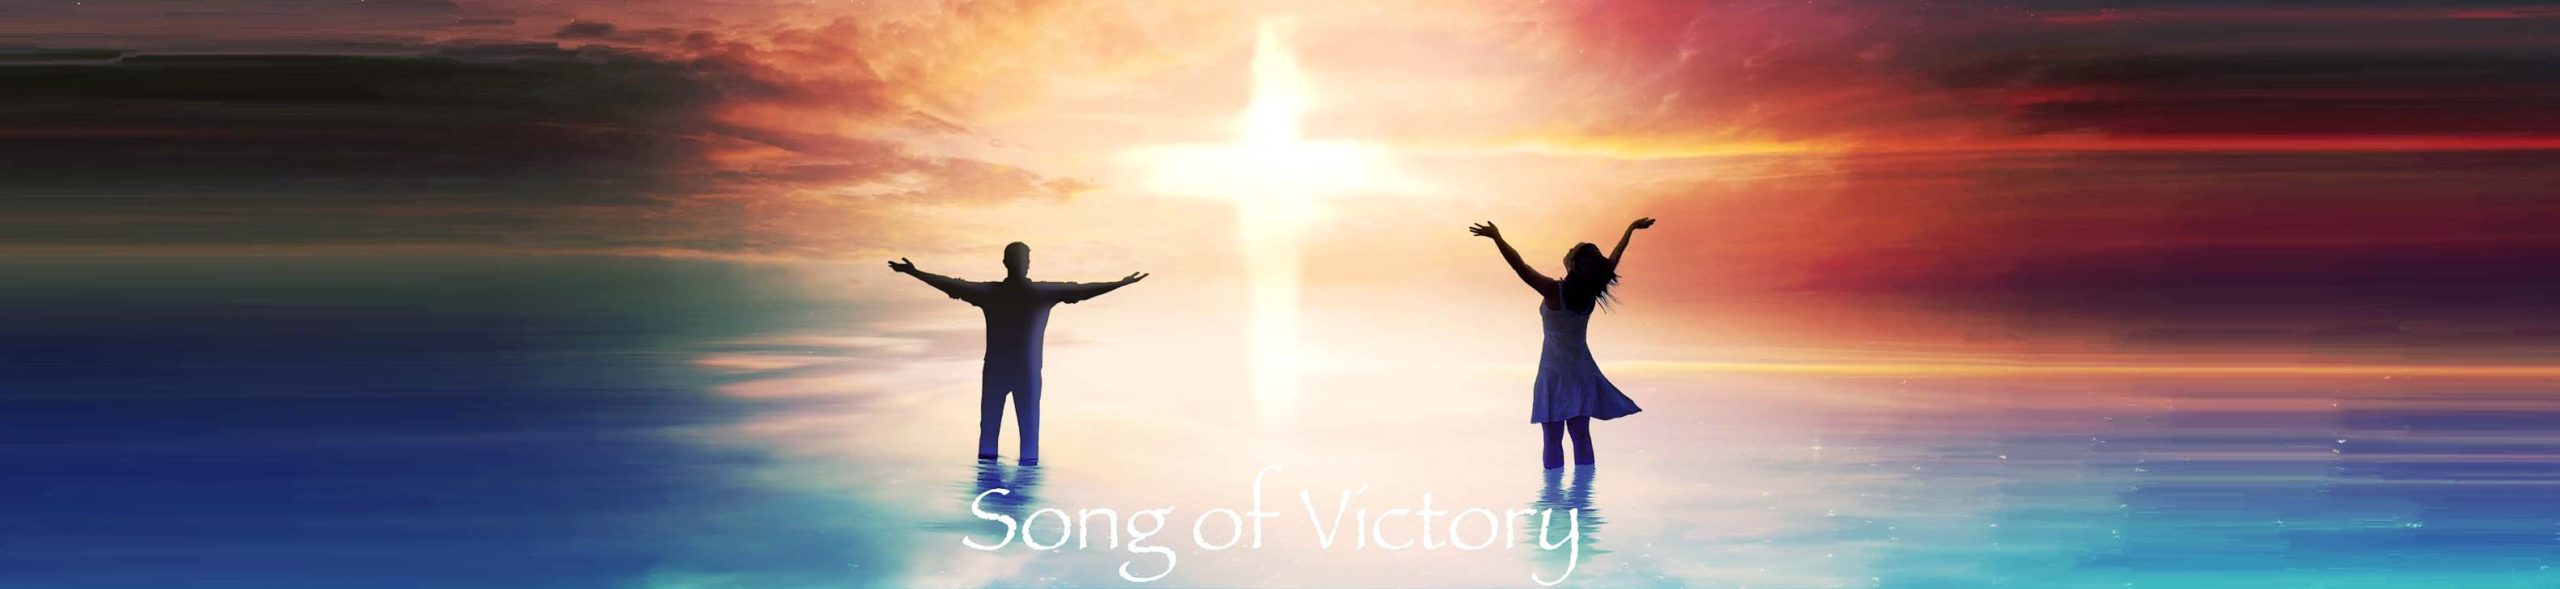 Song of Victory!